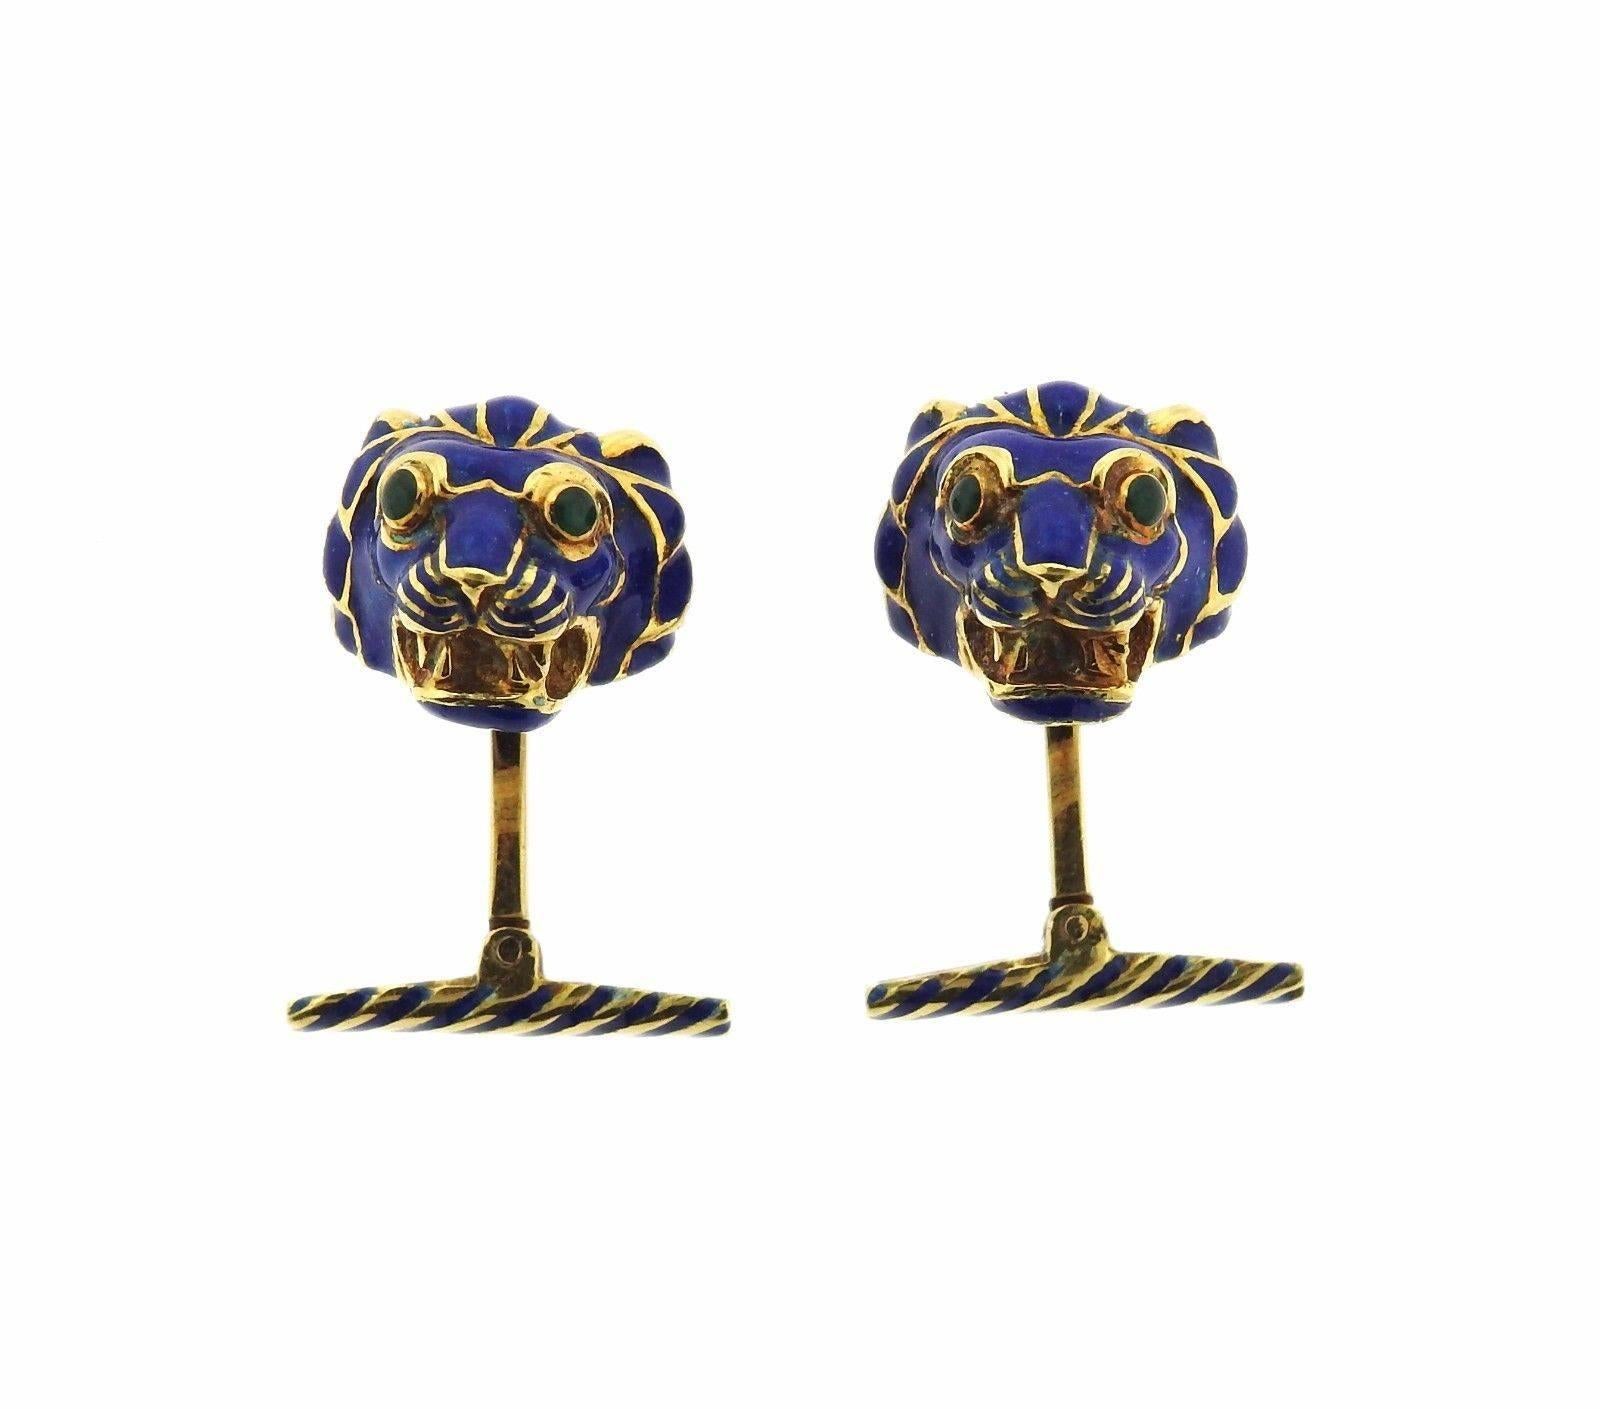 An 18k gold cufflink and stud set by David Webb.  The cufflink tops measure 15mm x 12mm and the studs measure 10mm x 11mm.  The weight of the set is 33.9 grams. Marked: Webb, 18k.